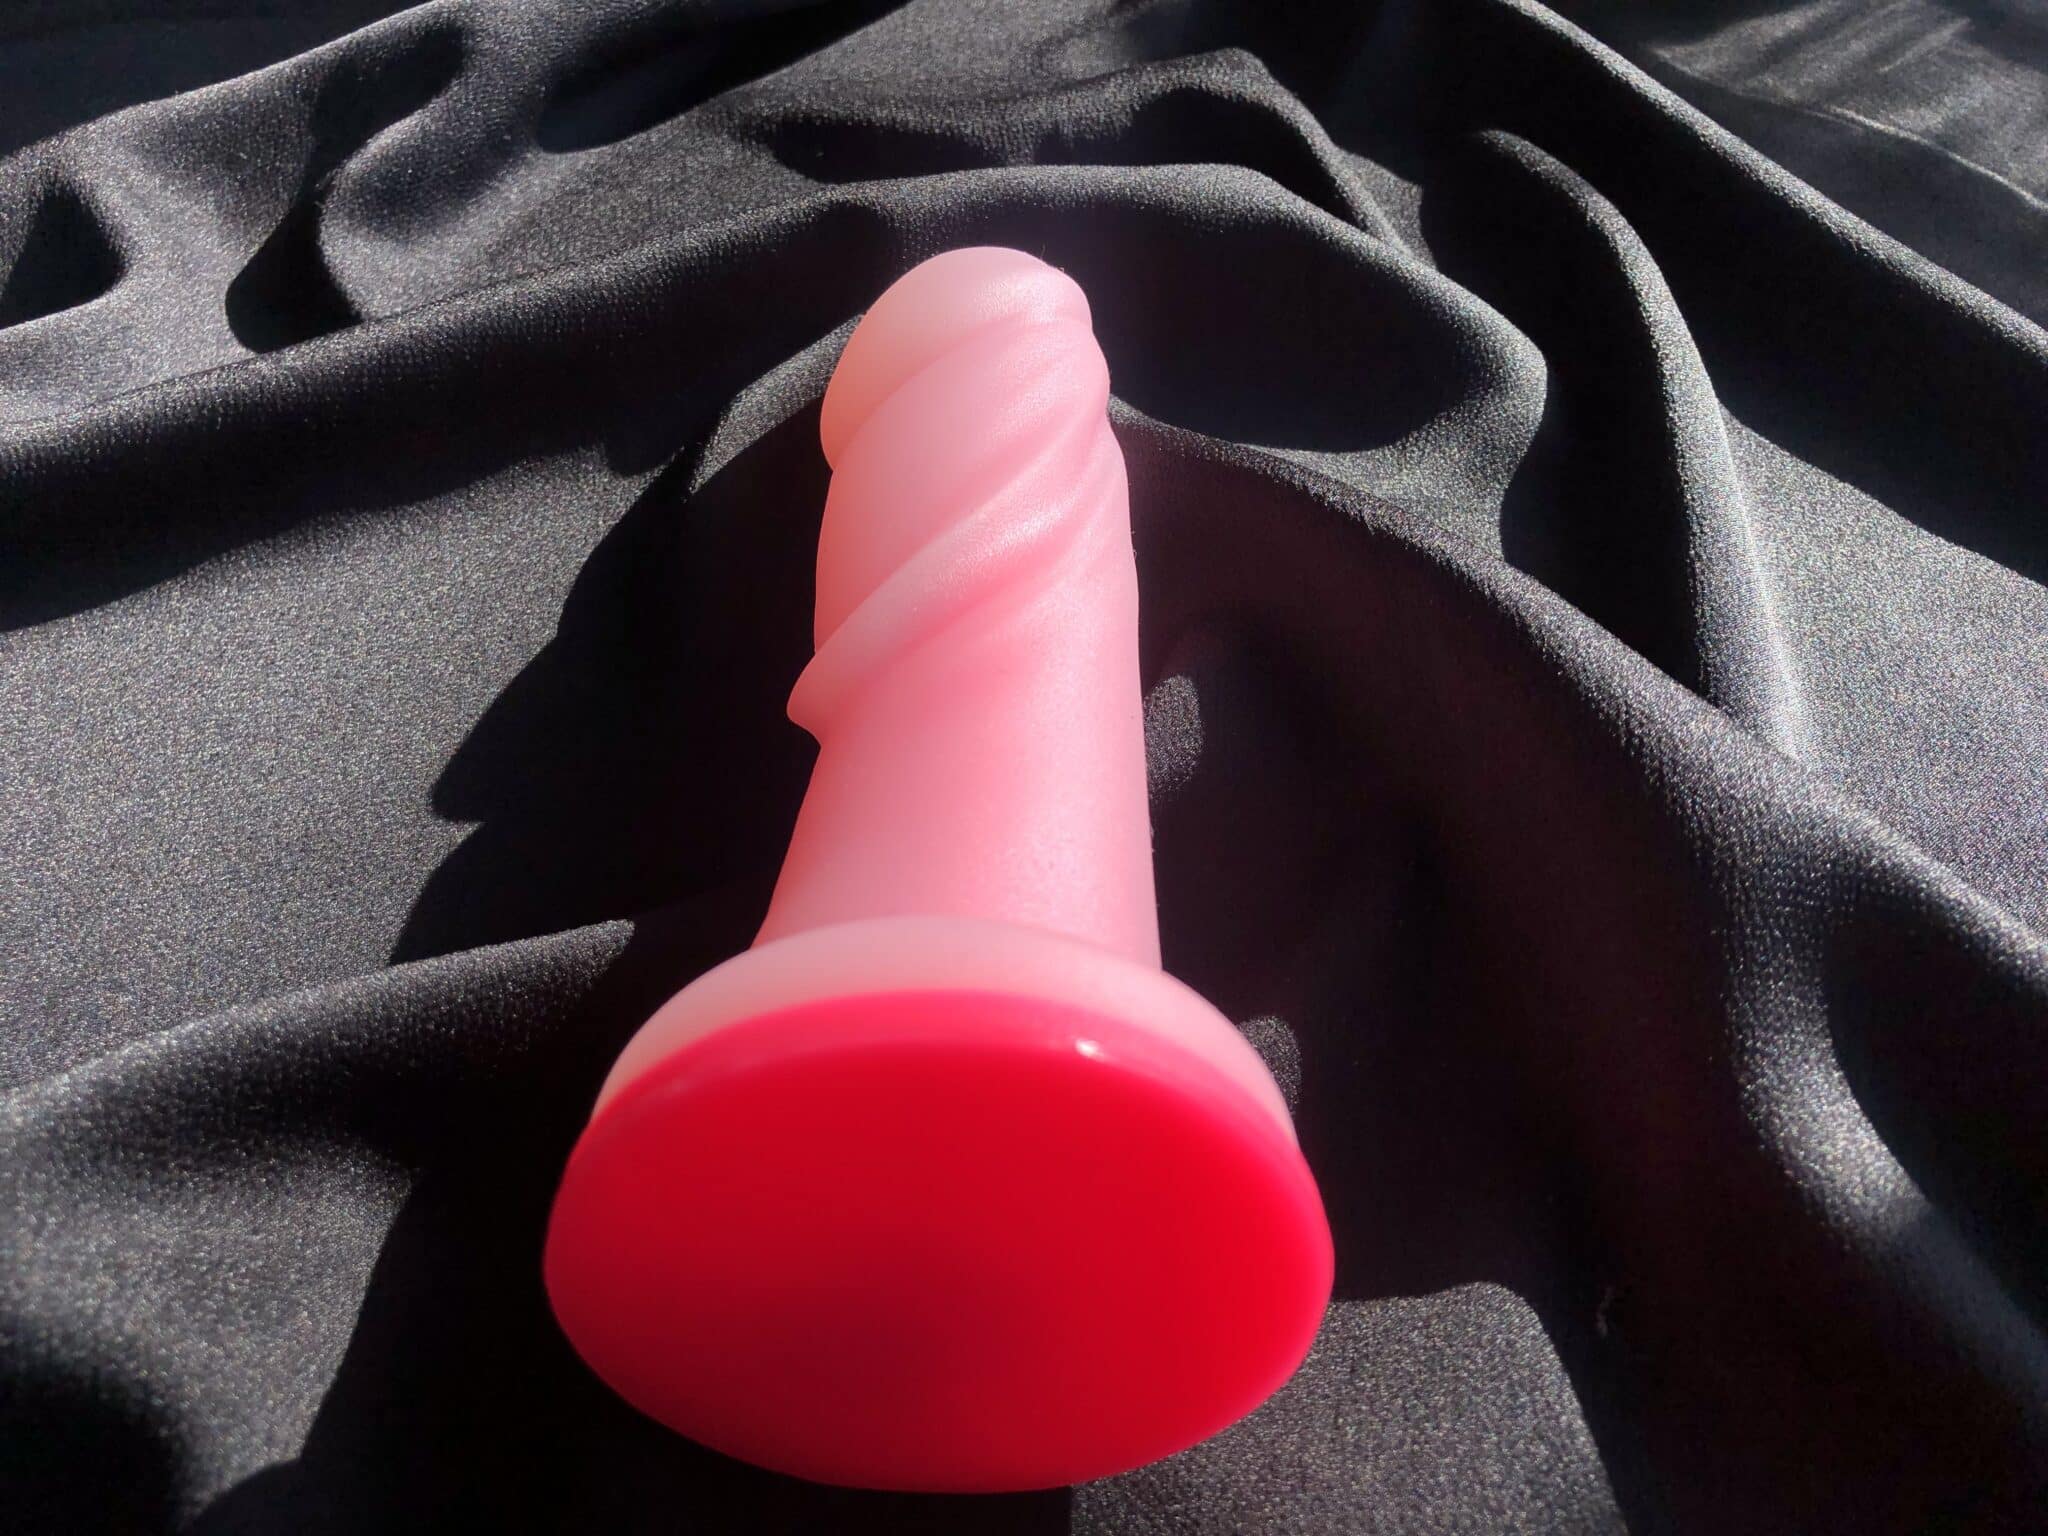 Tantus Cush Review of the Quality